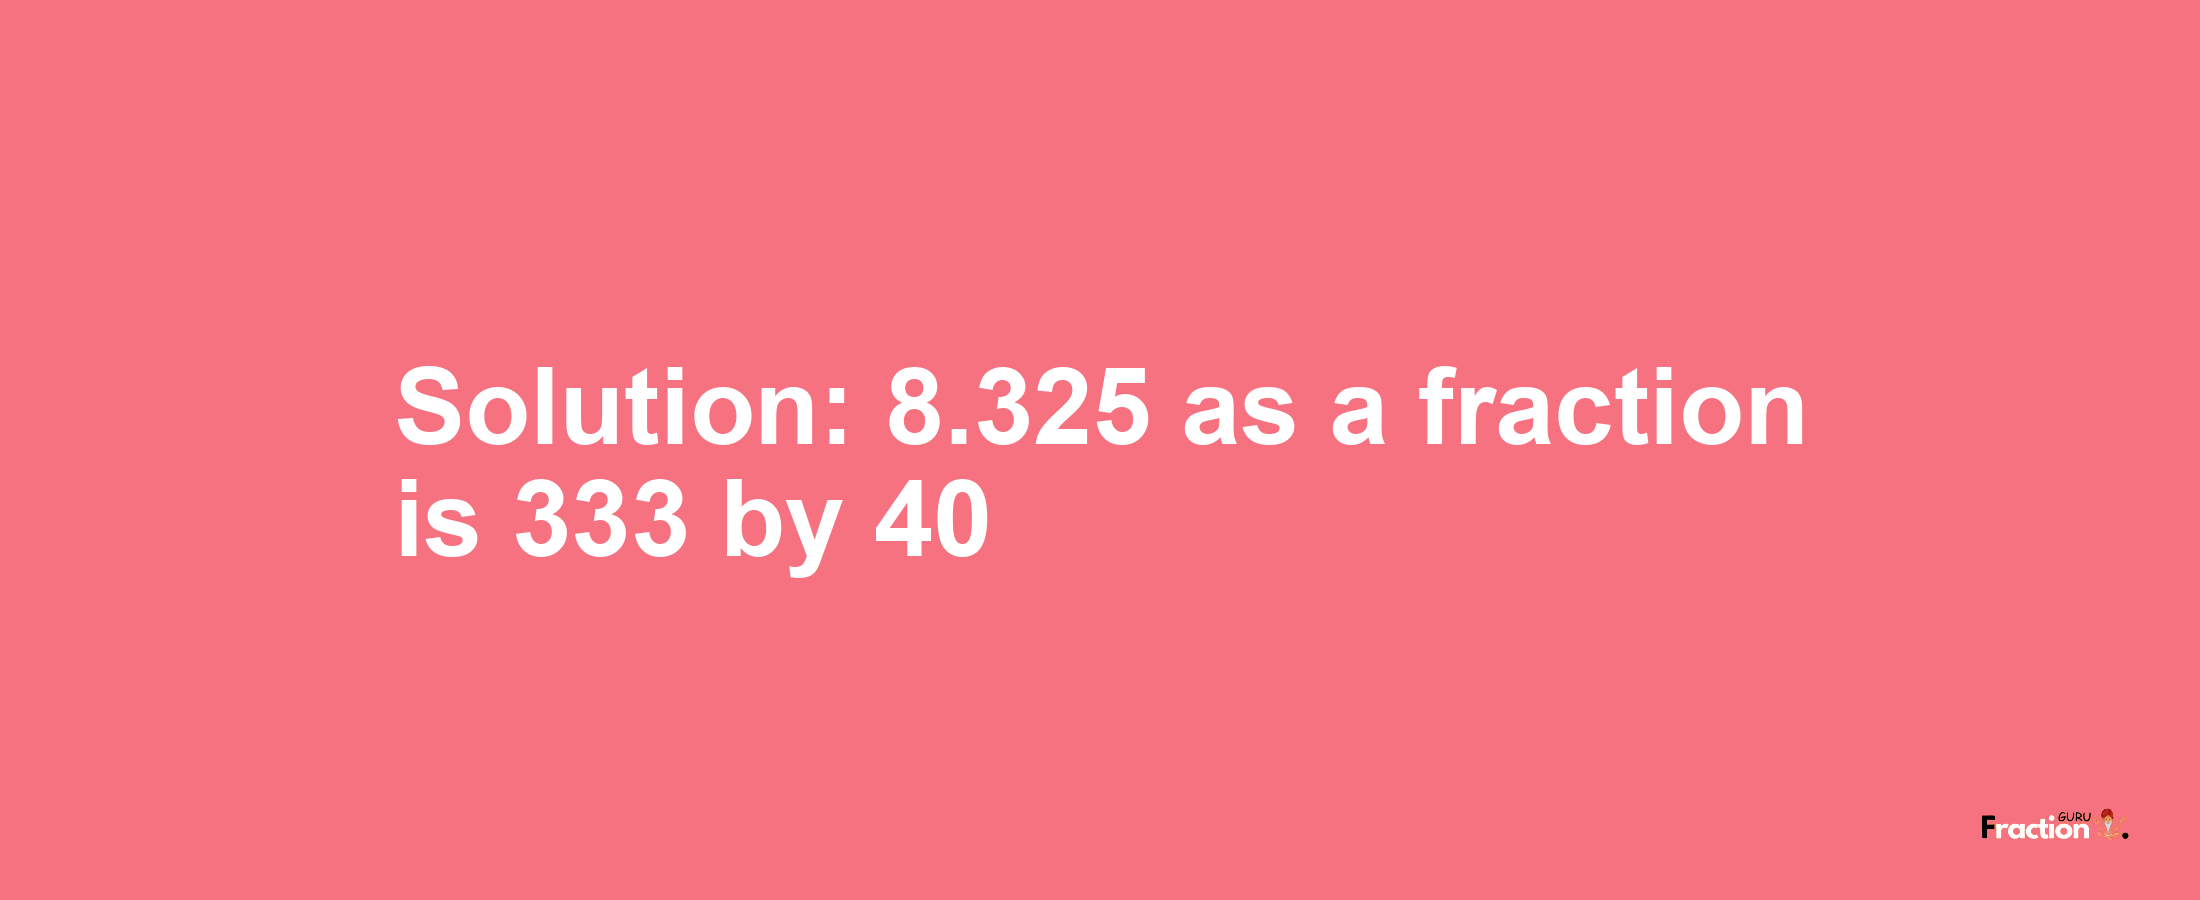 Solution:8.325 as a fraction is 333/40